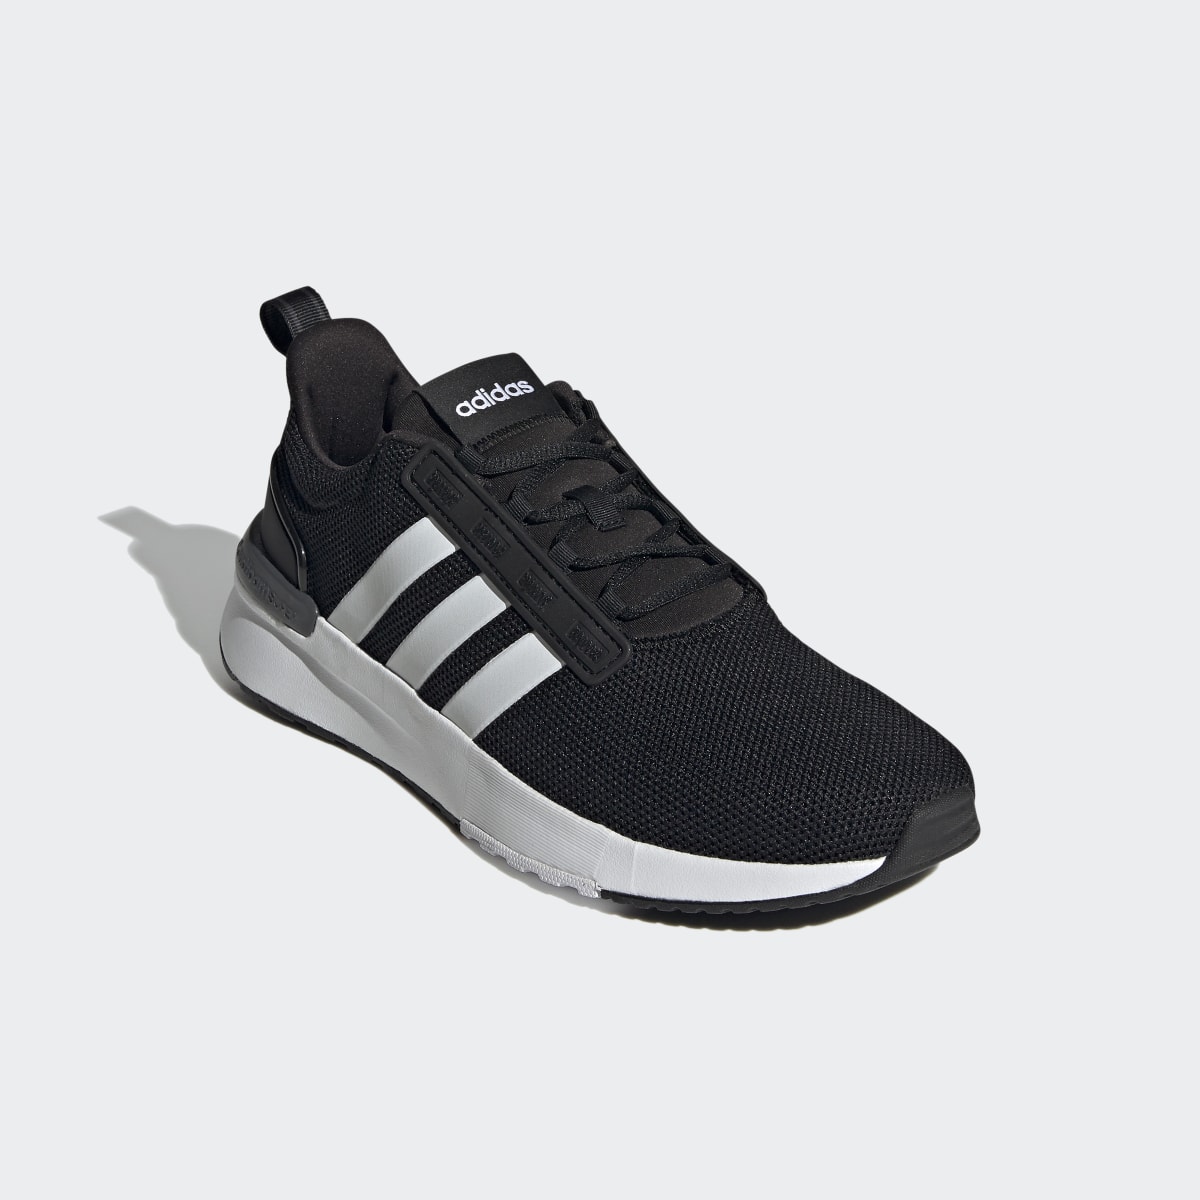 Adidas Chaussure Racer TR21. 4